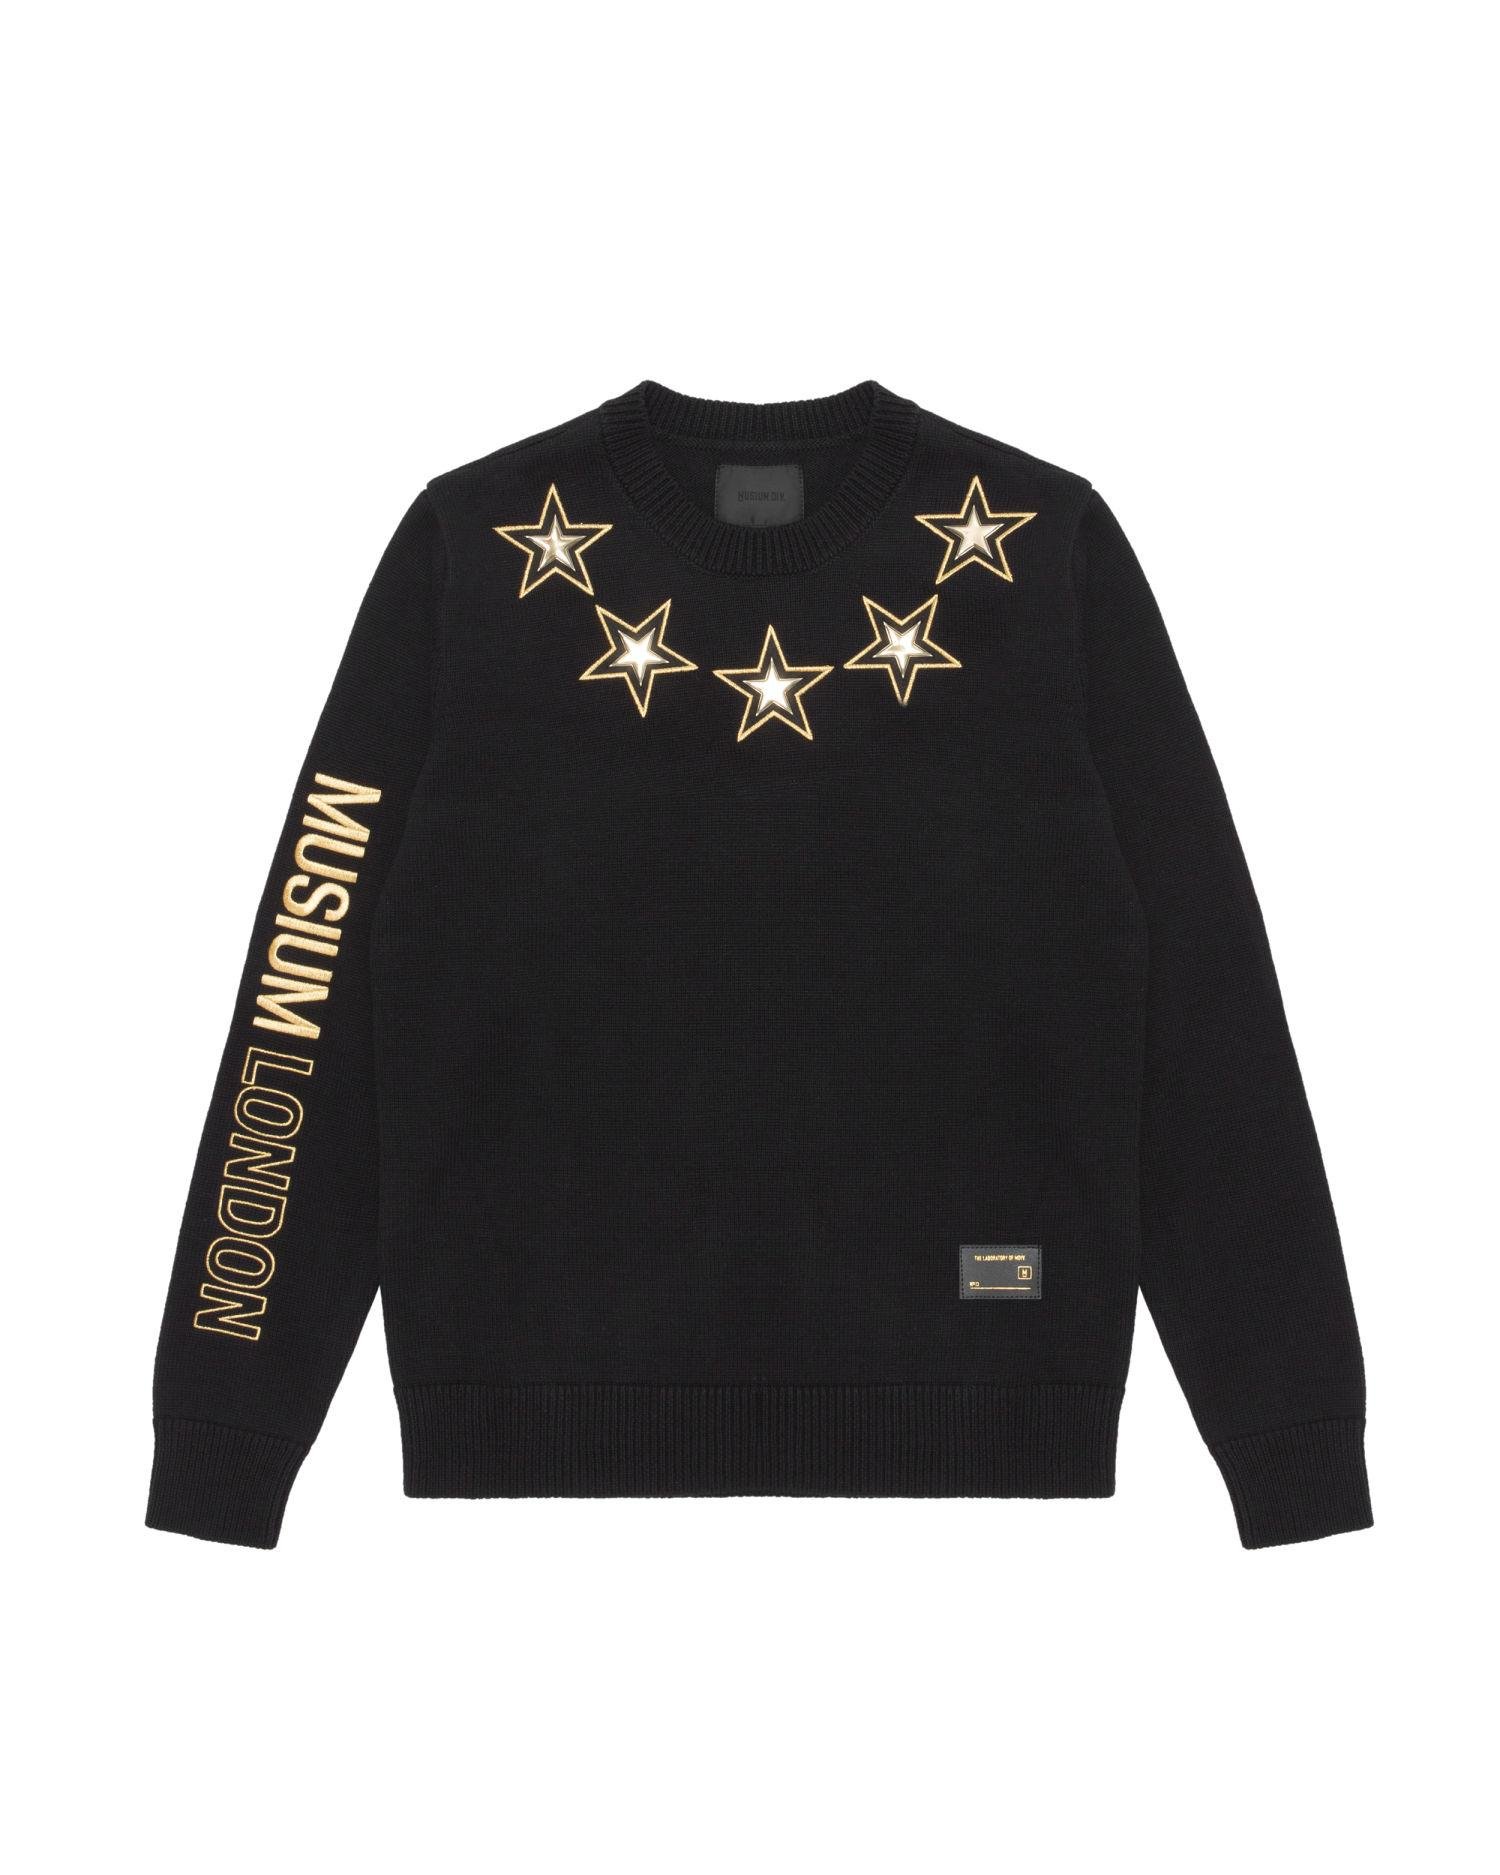 Star patch knit sweater by MUSIUM DIV.